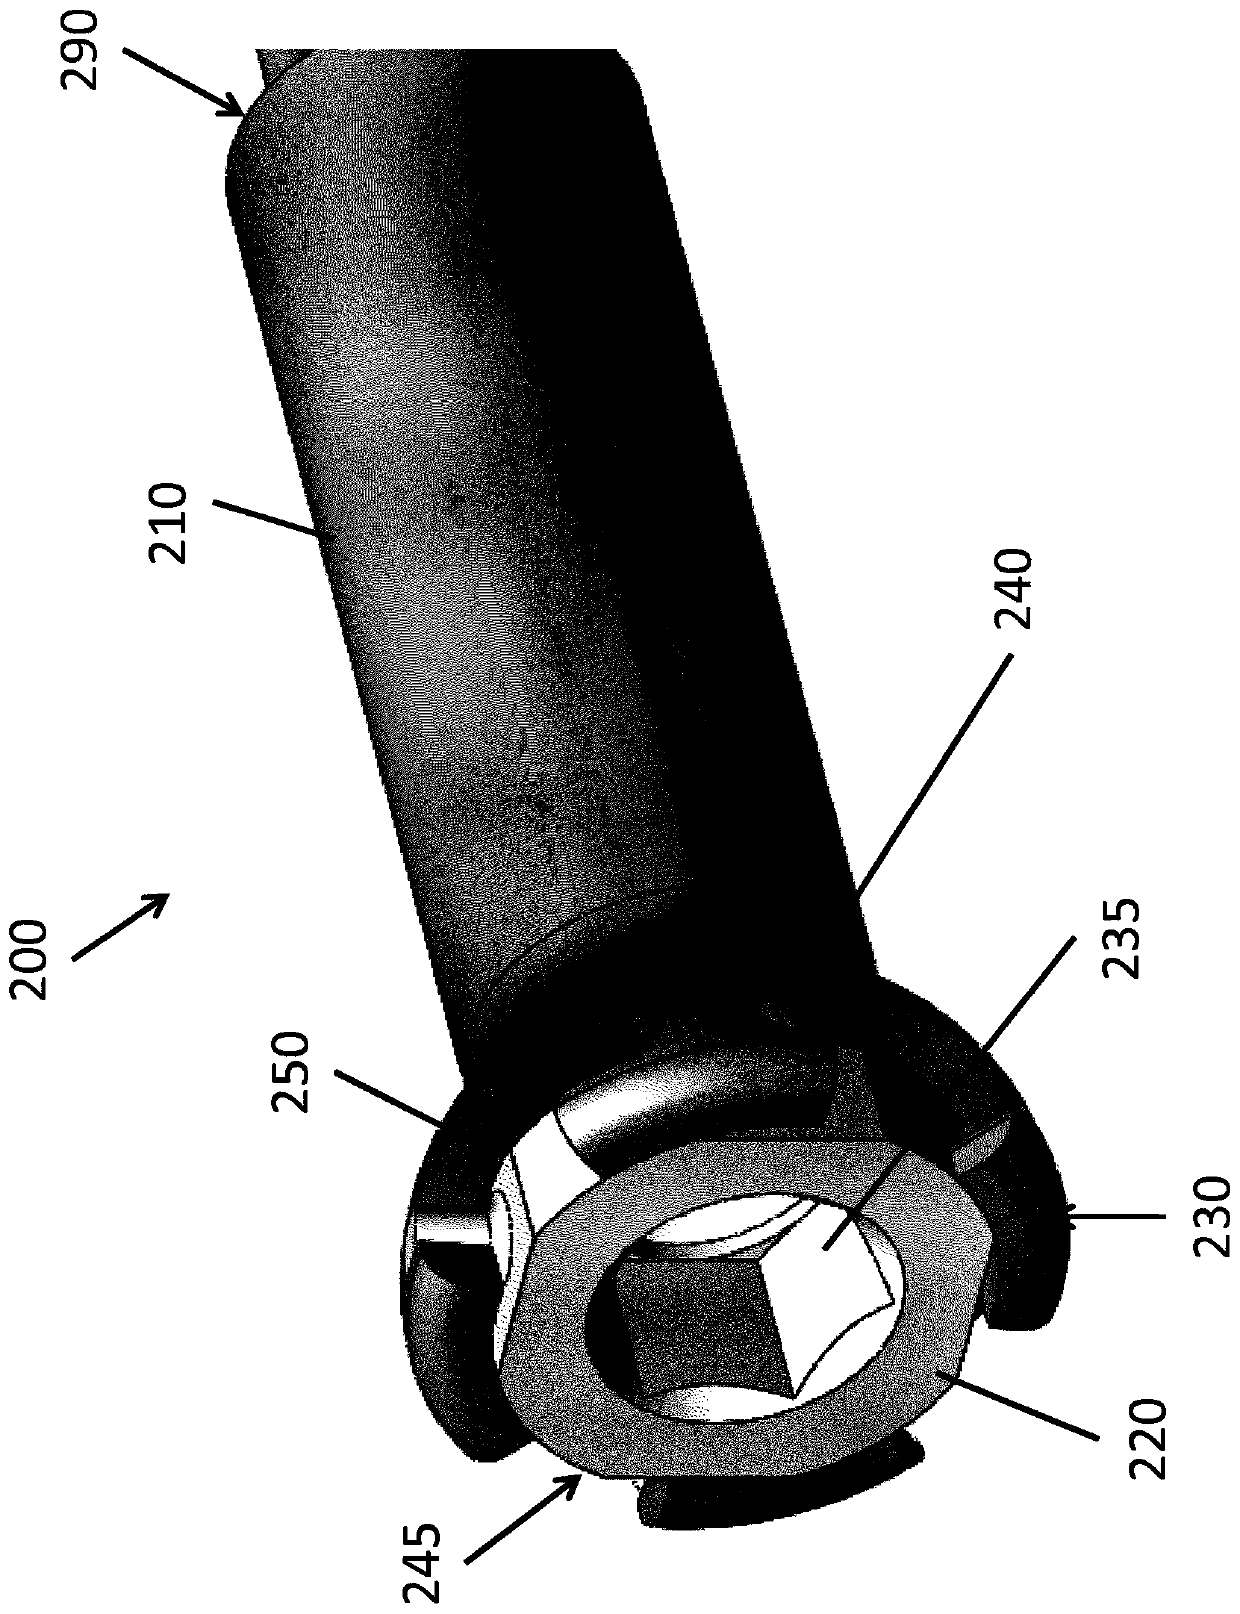 Intramedullary fixation device with shape locking interface